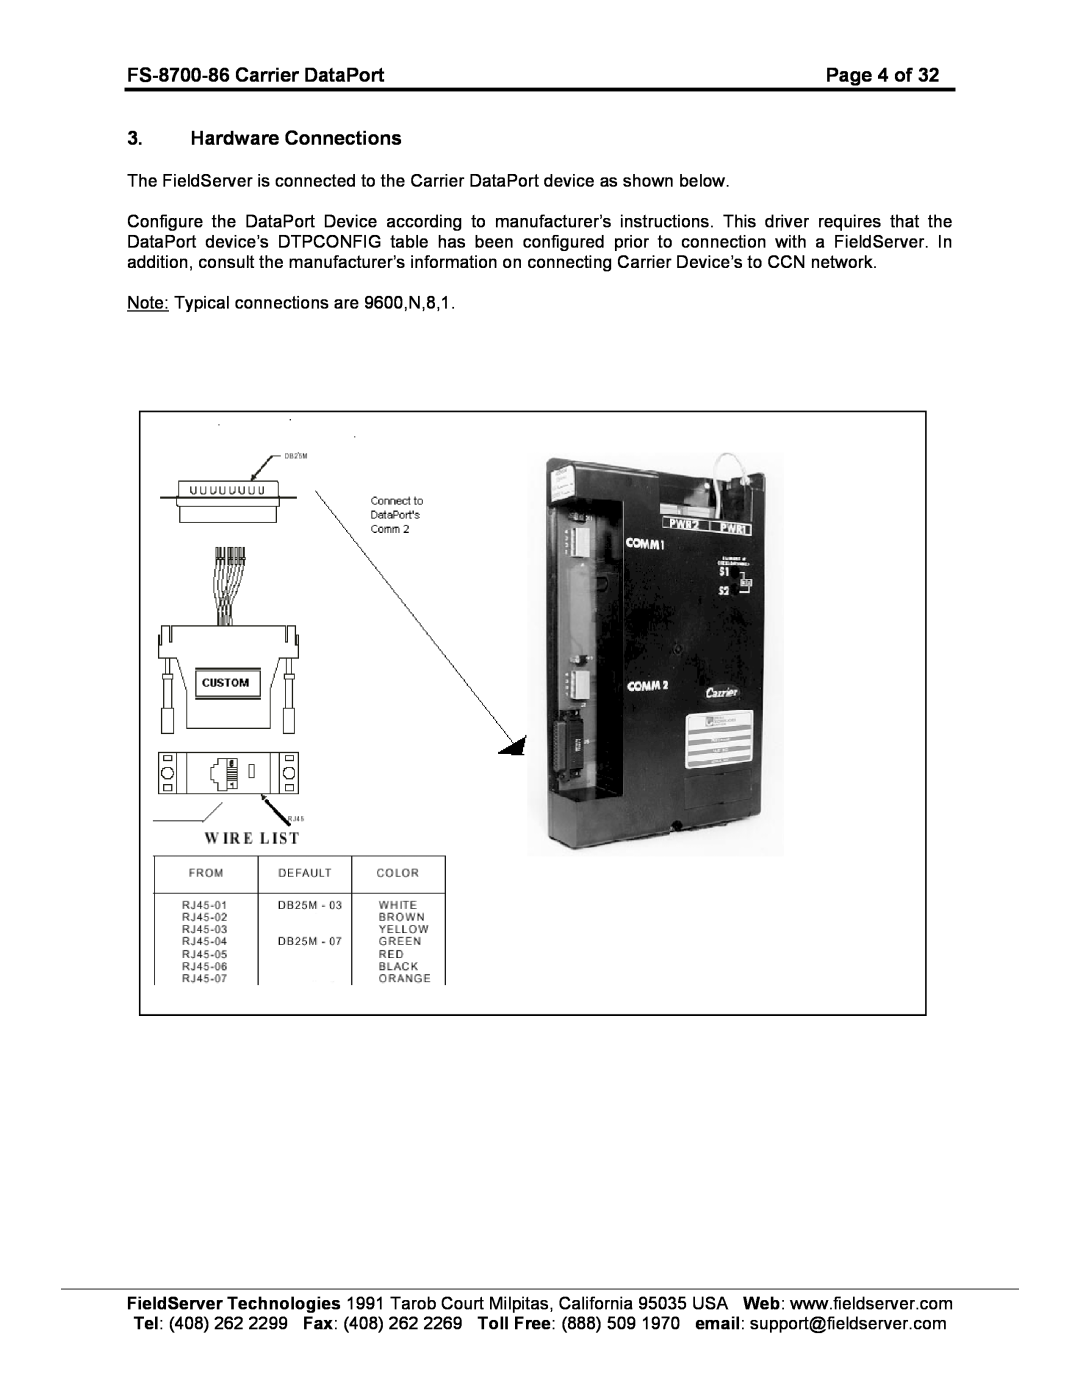 FieldServer Page 4 of, Hardware Connections, FS-8700-86 Carrier DataPort, Note Typical connections are 9600,N,8,1 